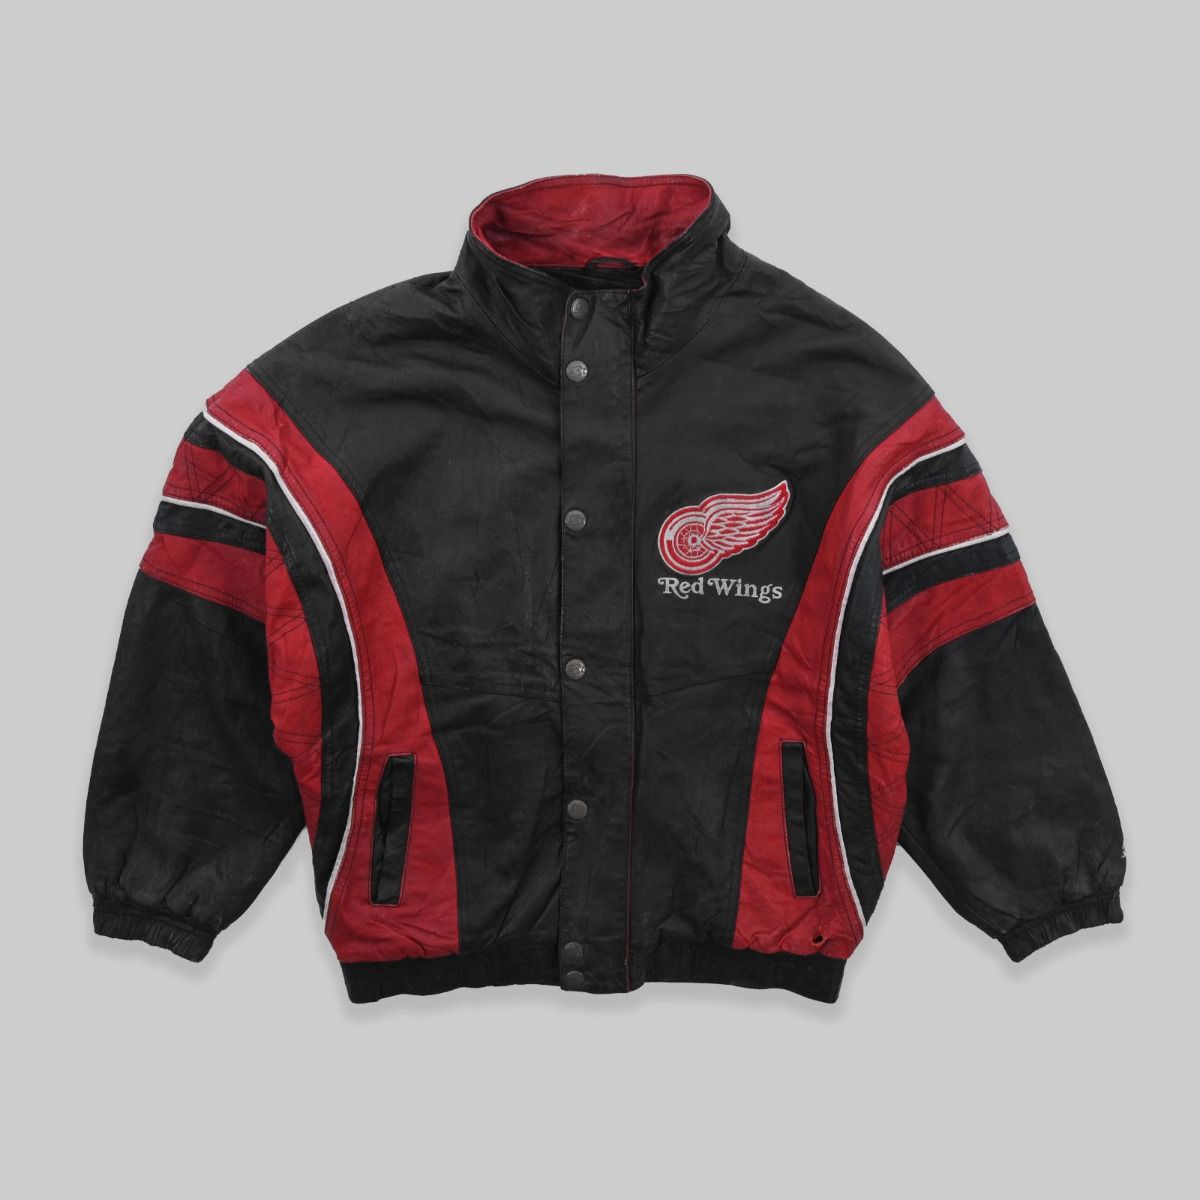 Detroit Red Wings X Starter 1990s Leather Jacket 